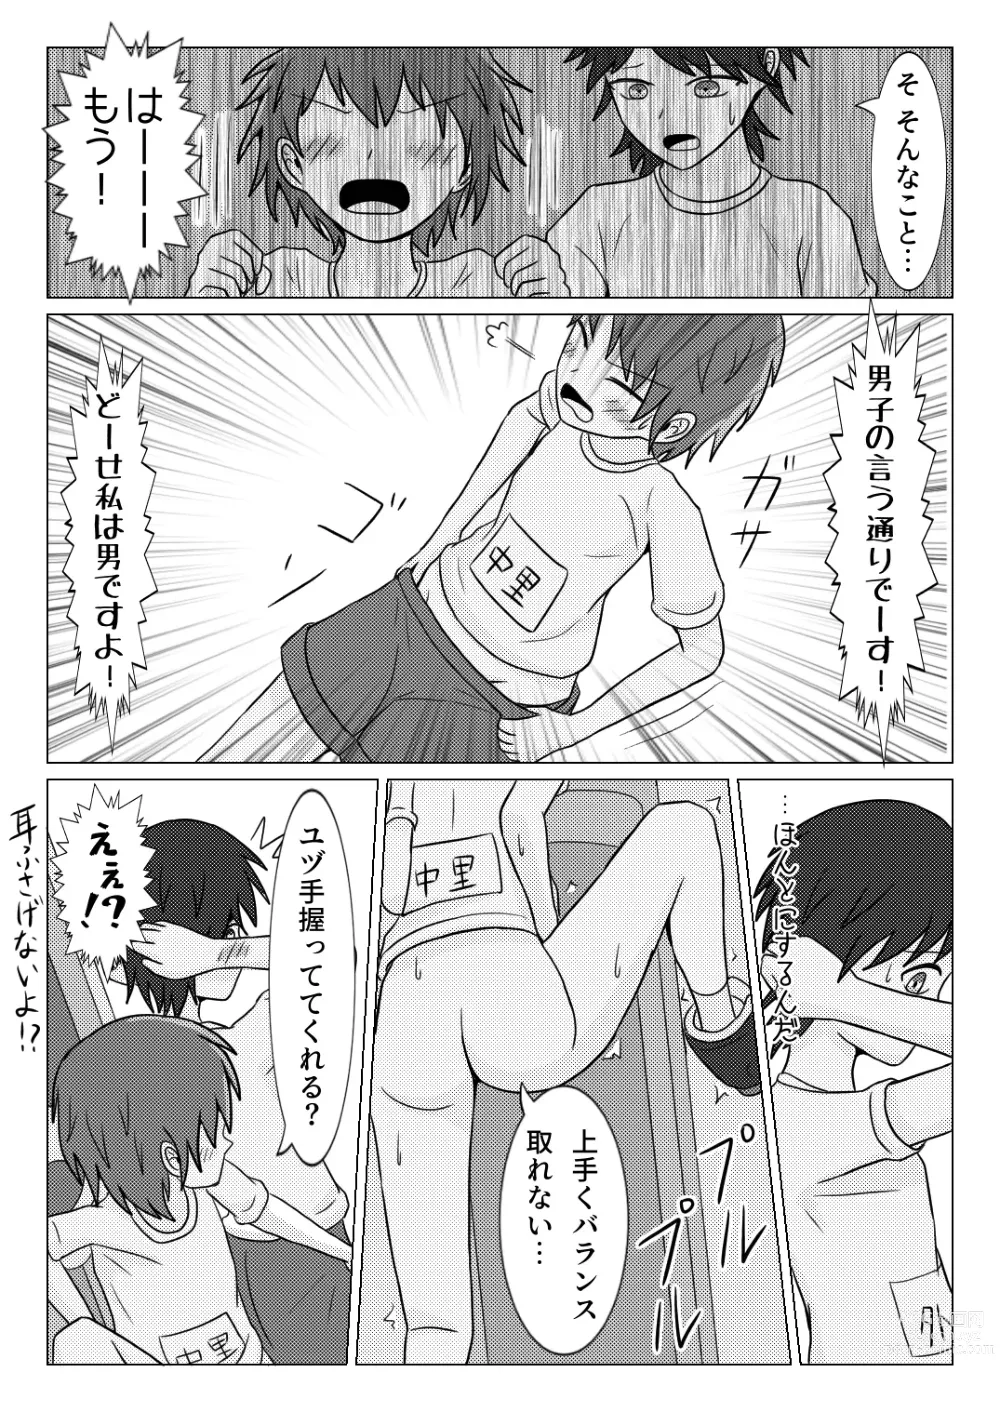 Page 15 of doujinshi After the school trip bus -Three-legged-